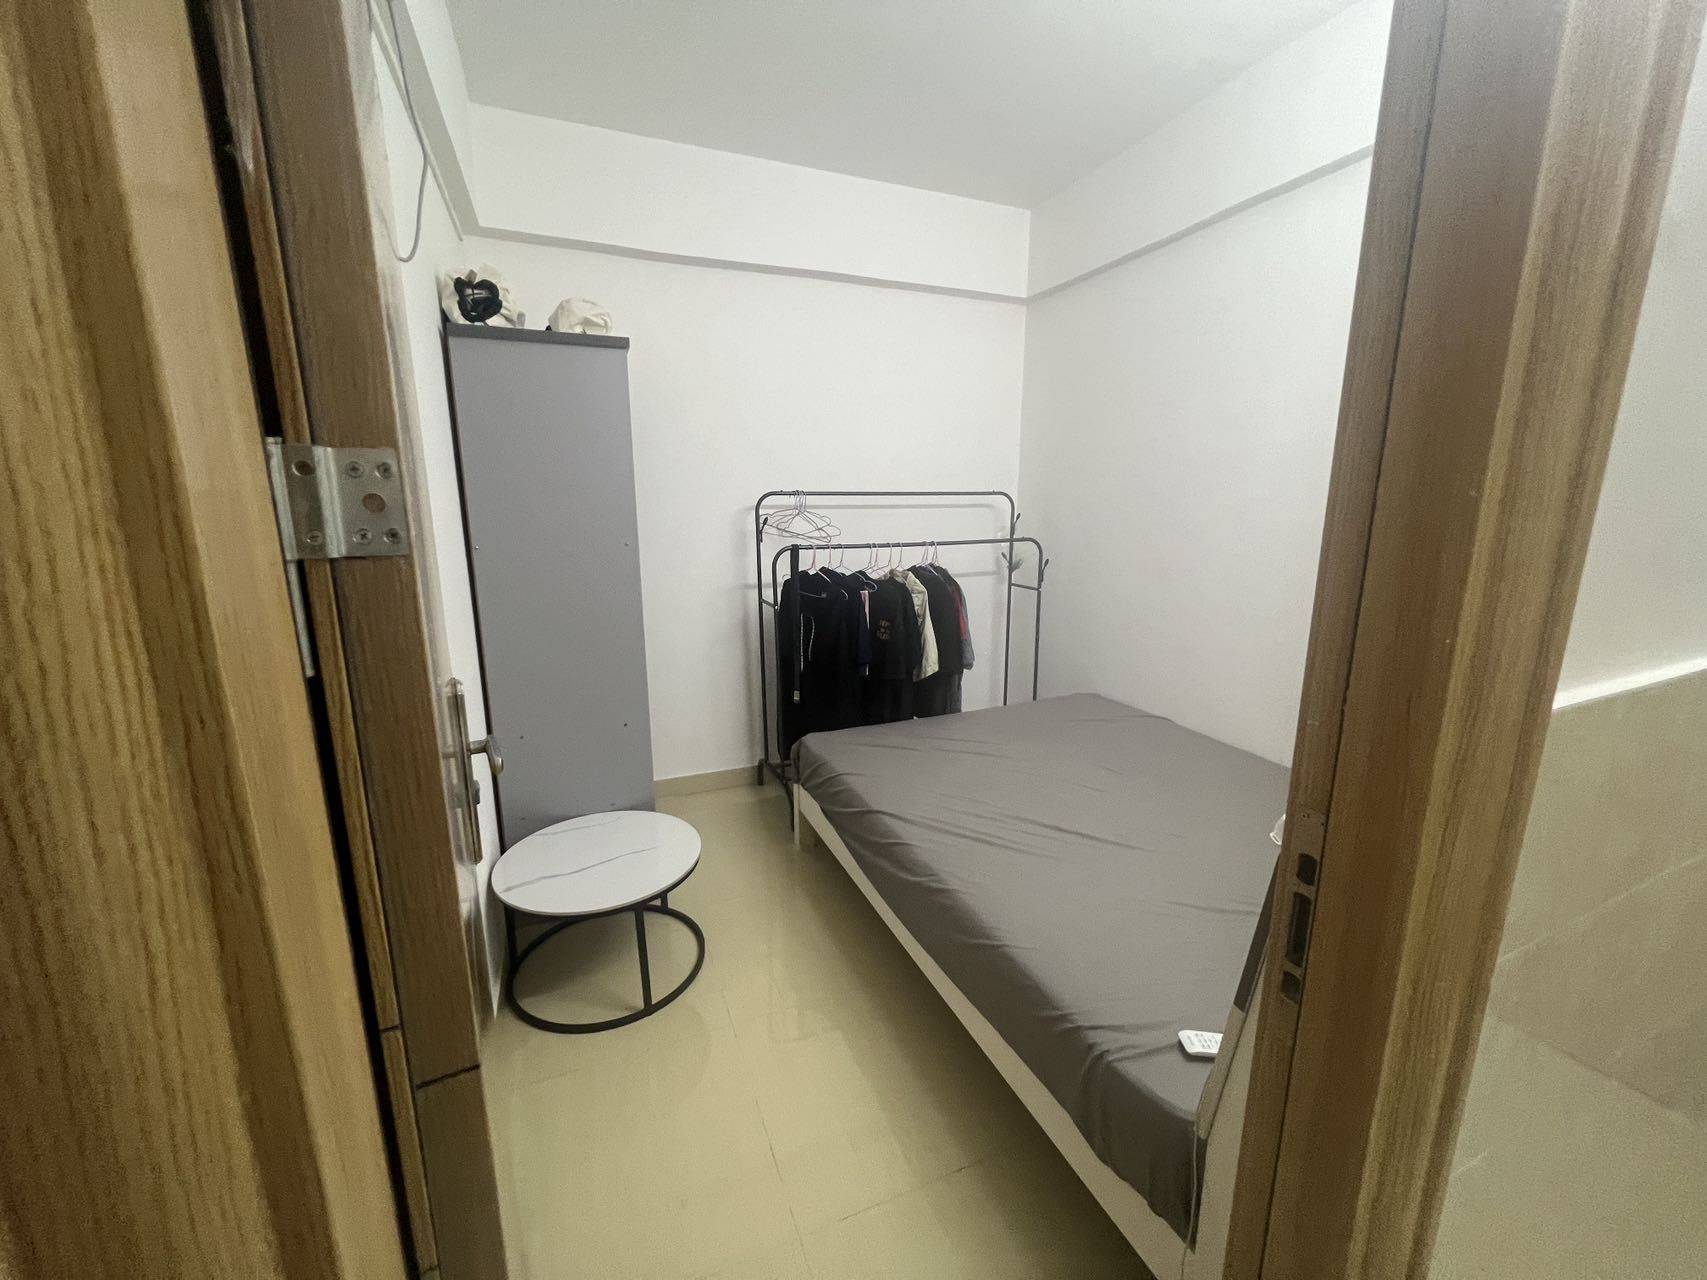 Dongguan-Dongcheng-Cozy Home,Clean&Comfy,No Gender Limit,Chilled,LGBTQ Friendly,Pet Friendly